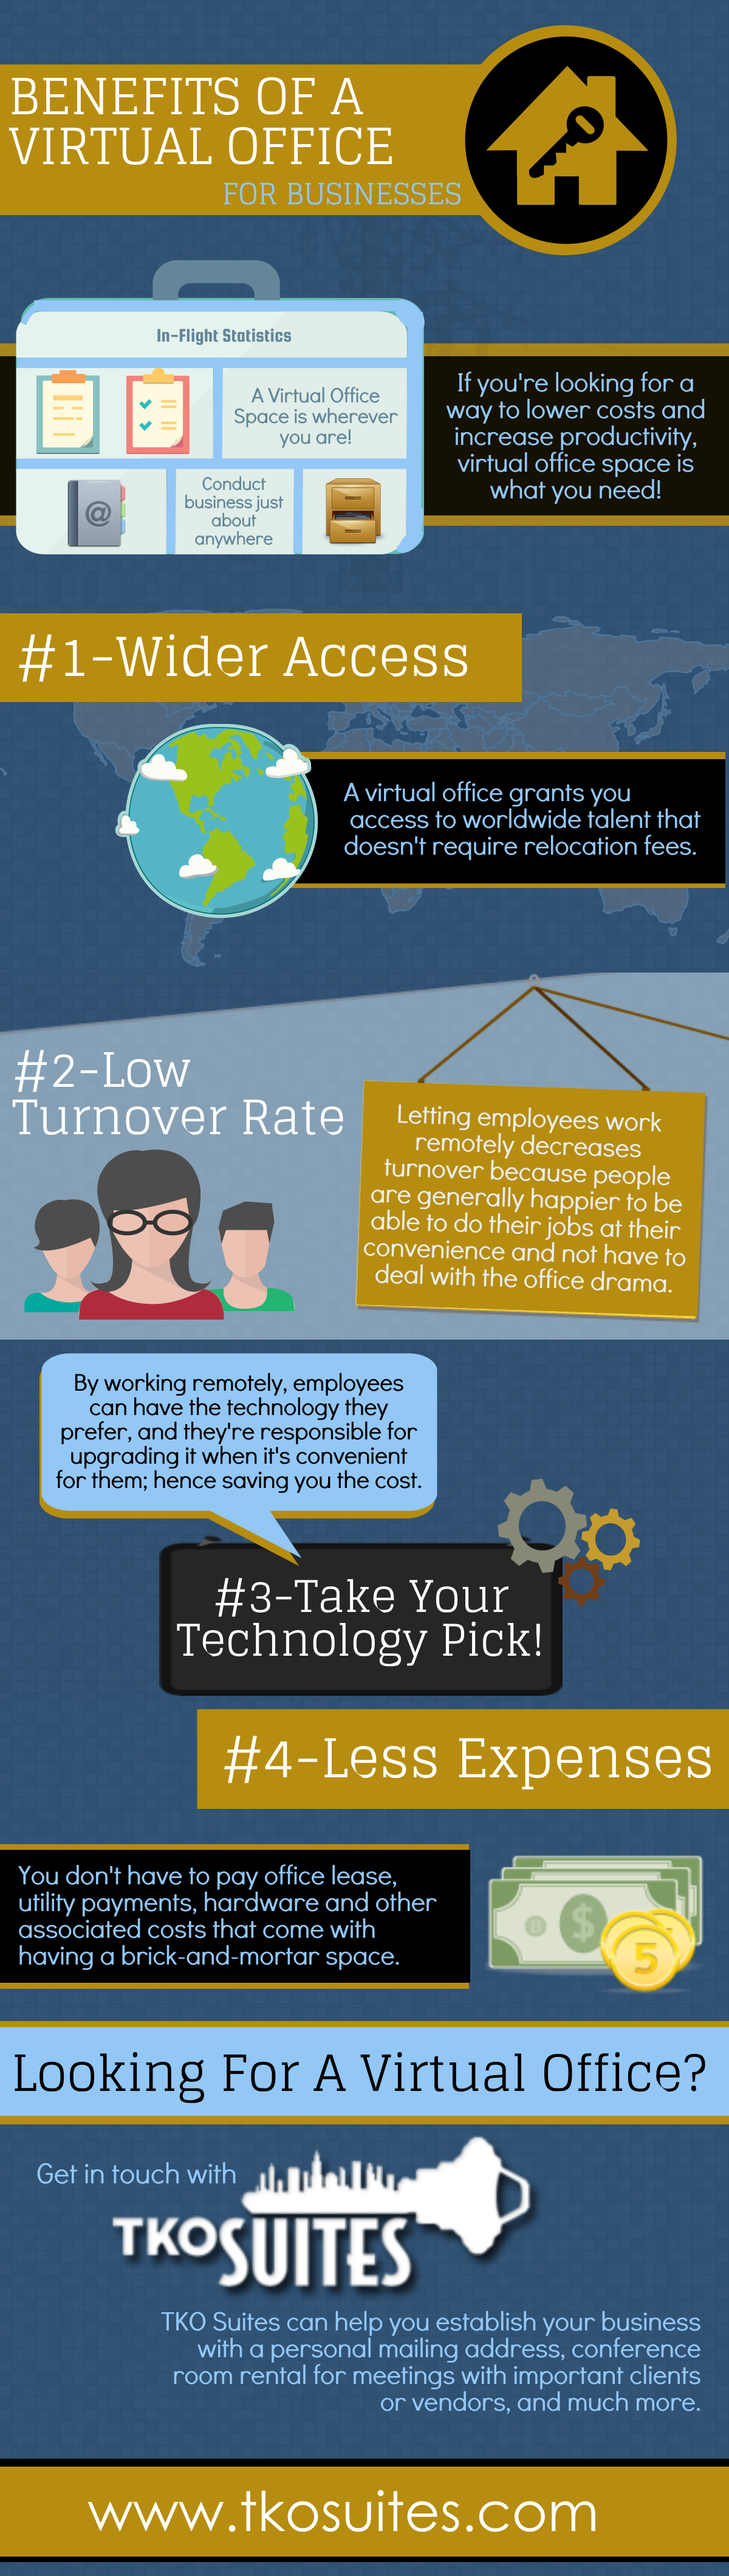 Benefits of a Virtual Office for Businesses | Visual.ly